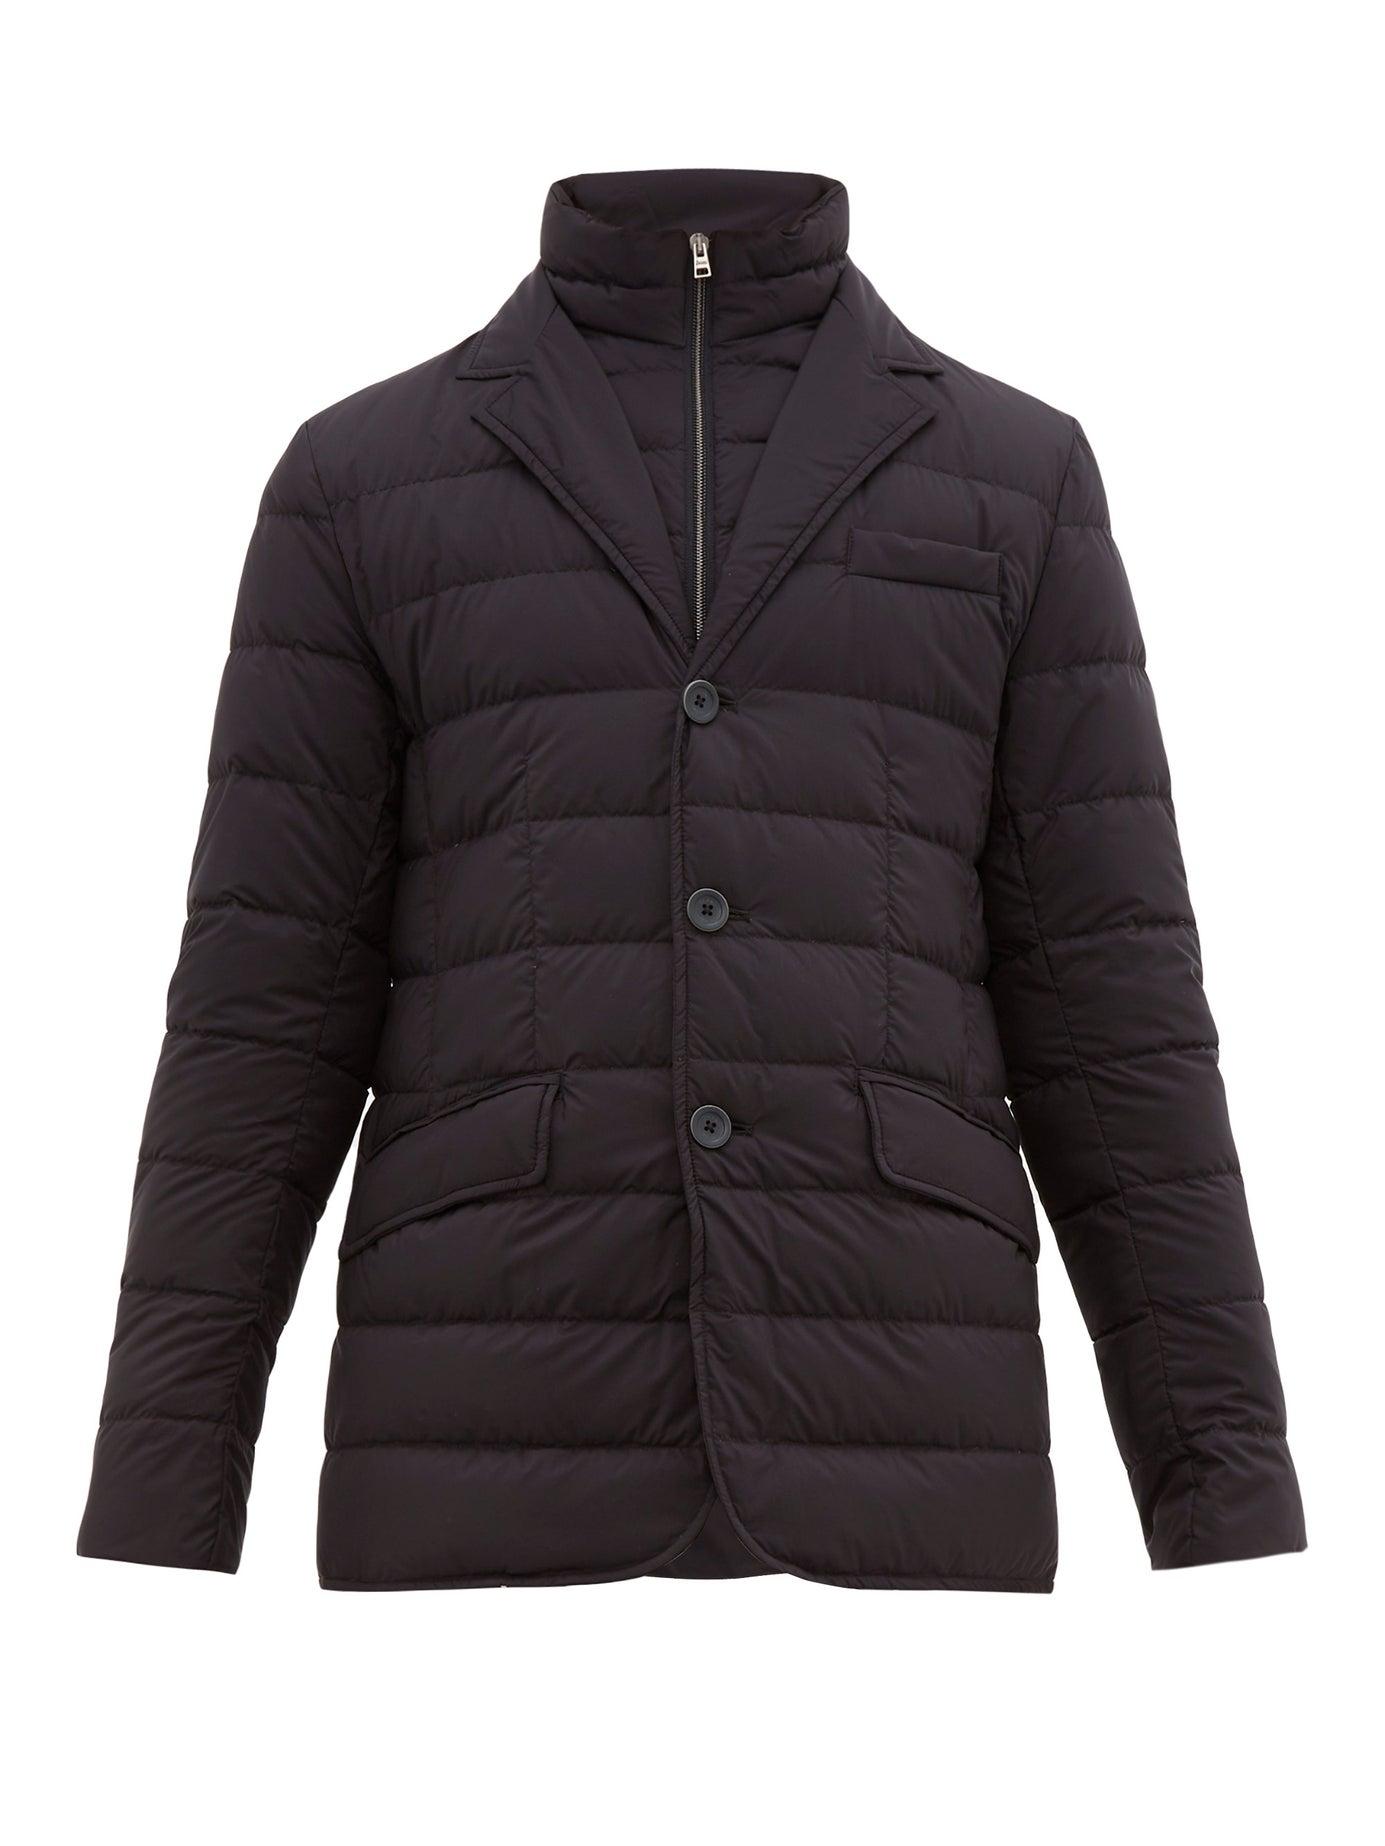 Herno La Giacca Quilted-down Jacket in Navy (Blue) for Men - Lyst